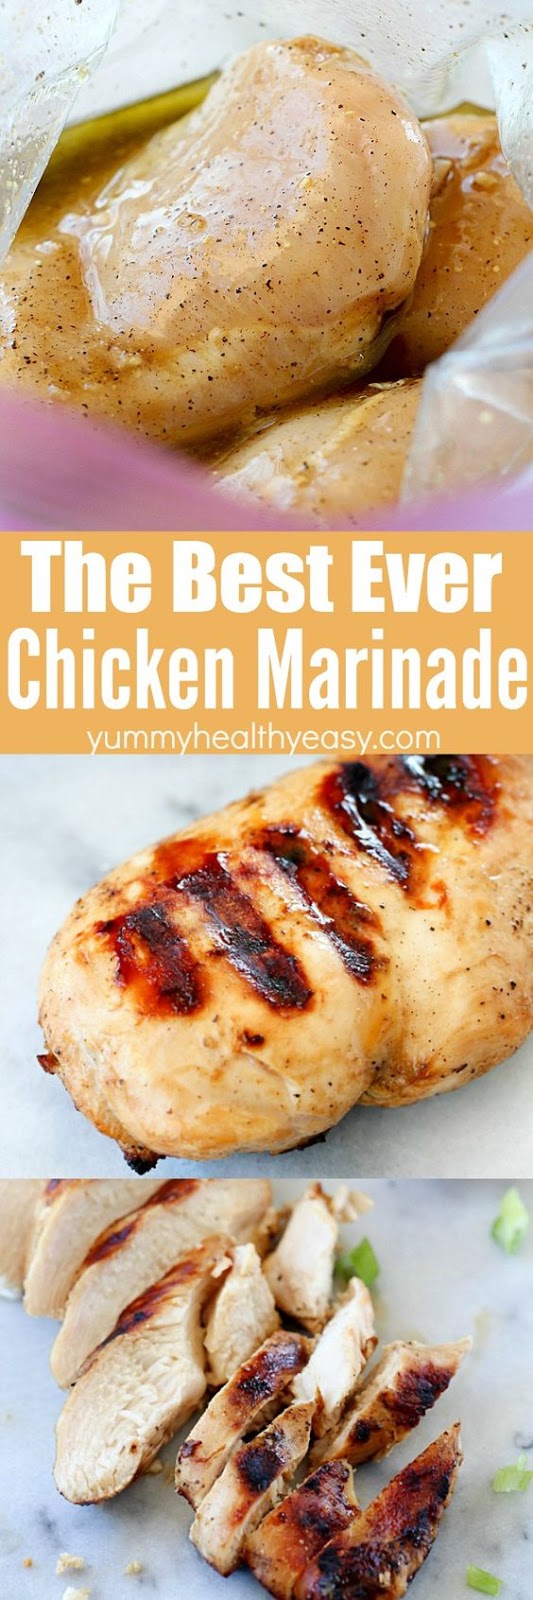 THE BEST CHICKEN MARINADE RECIPE! - TOP MOTHER RECIPES